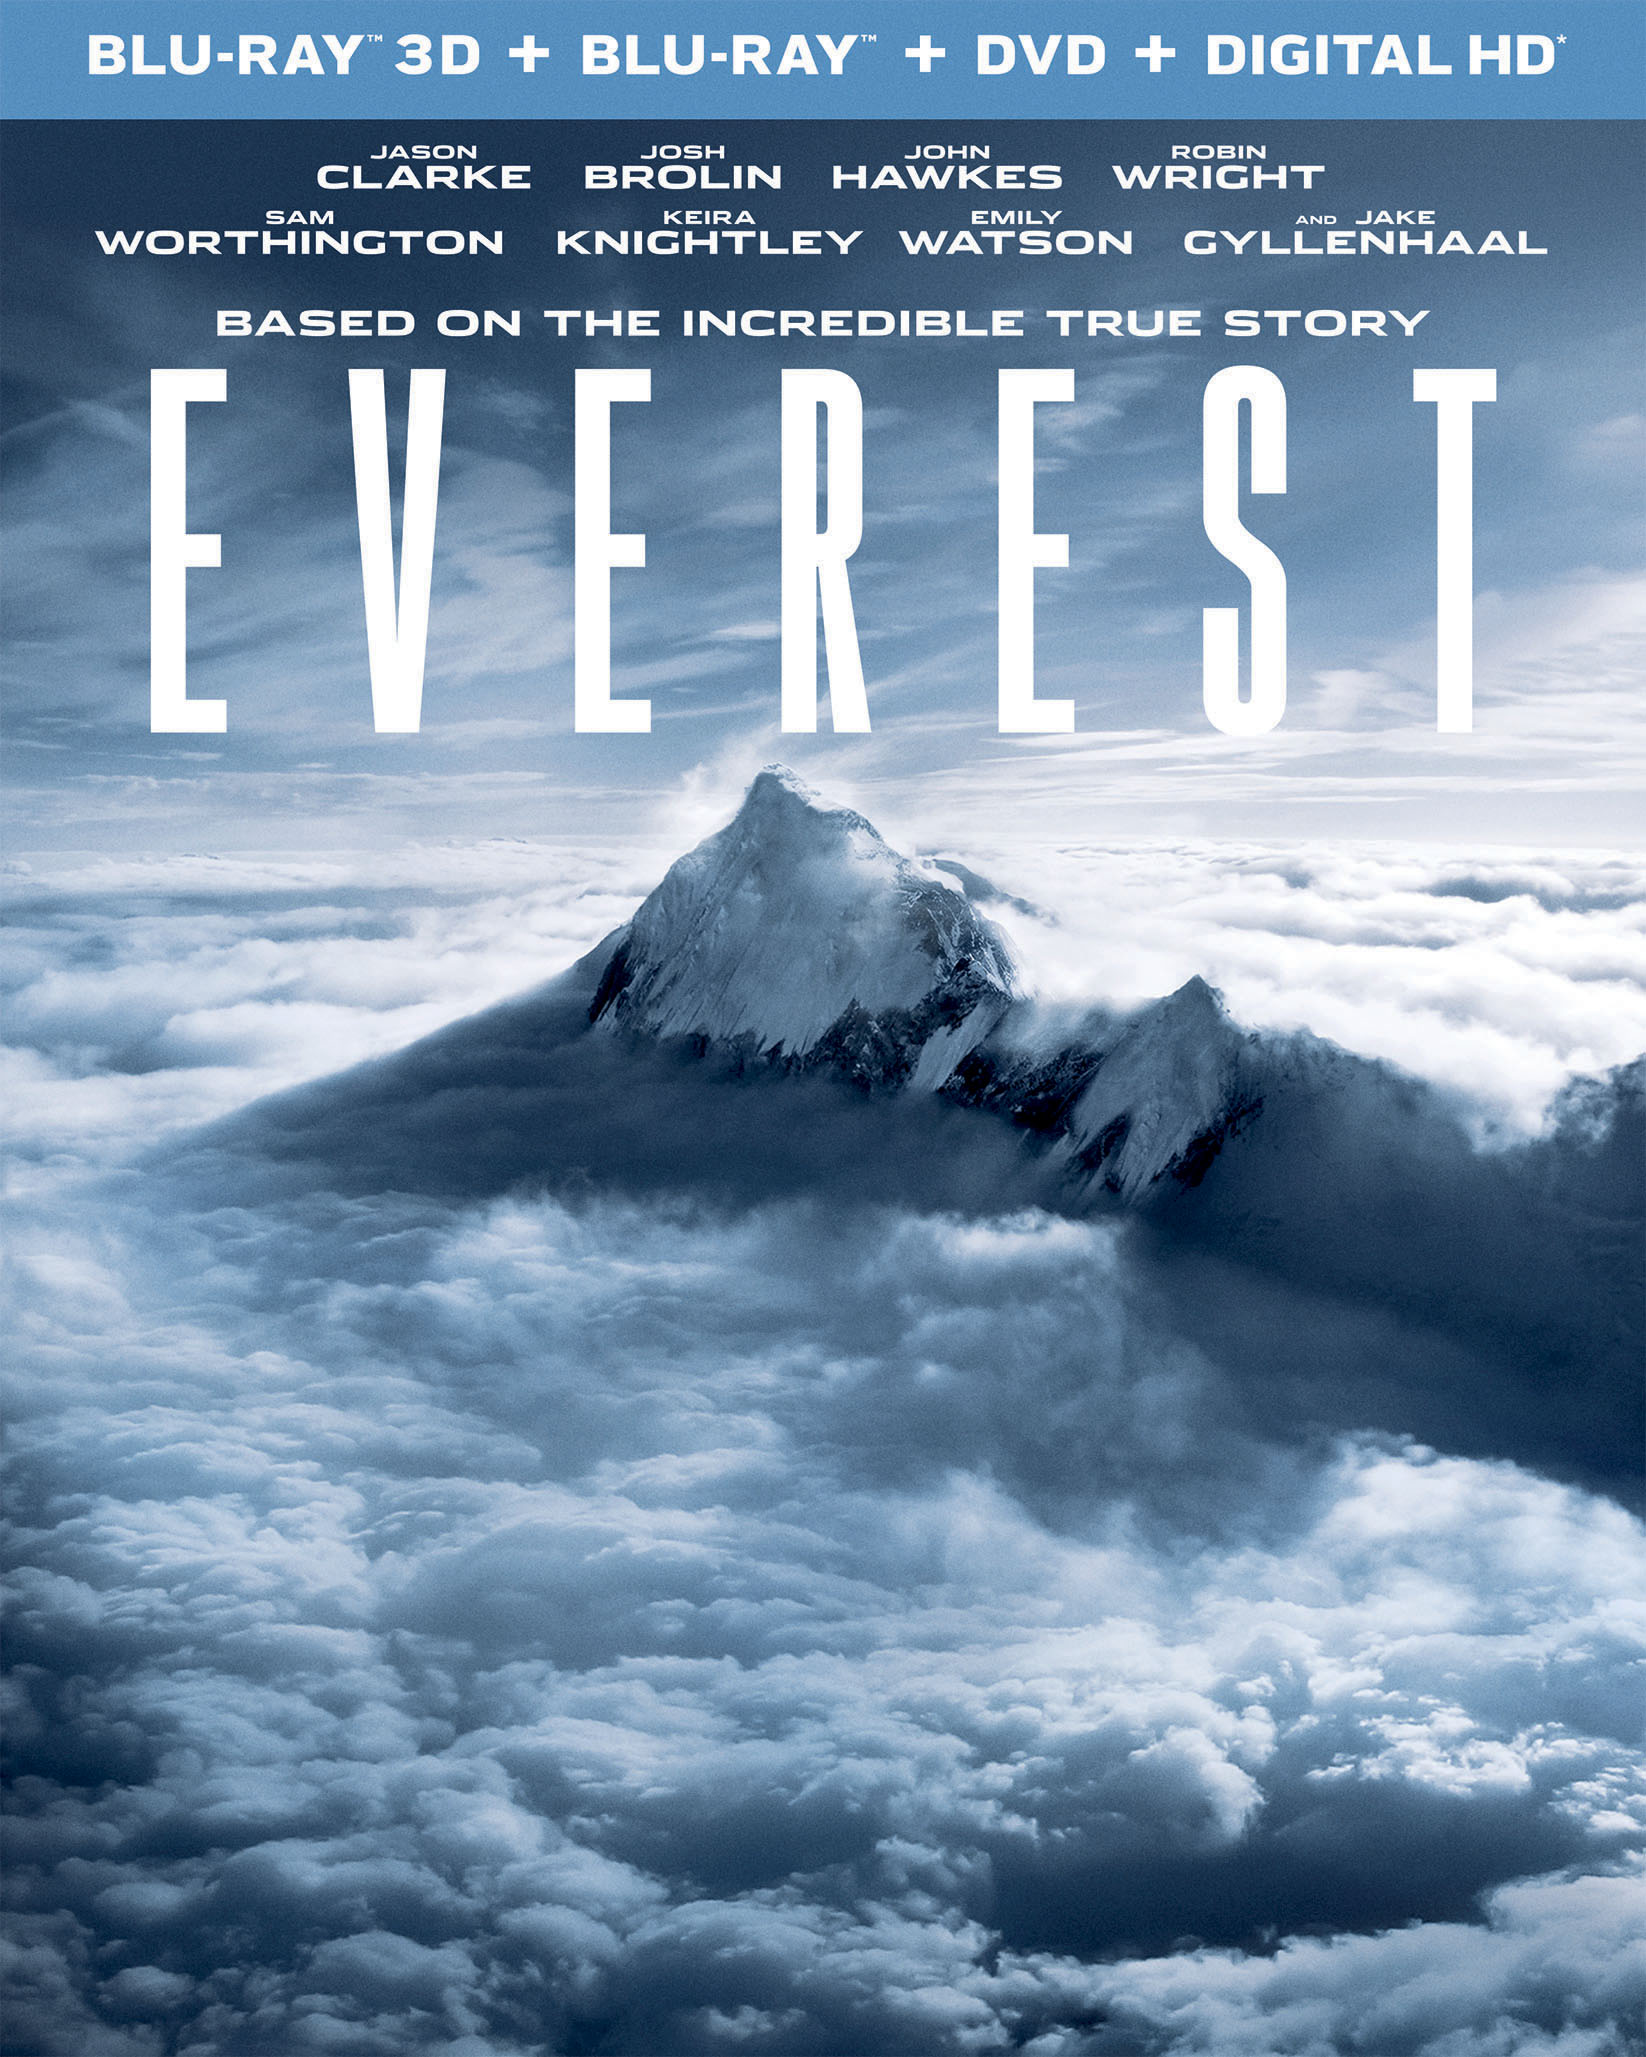 Contest: Special Edition of “Everest” With Carabiner!